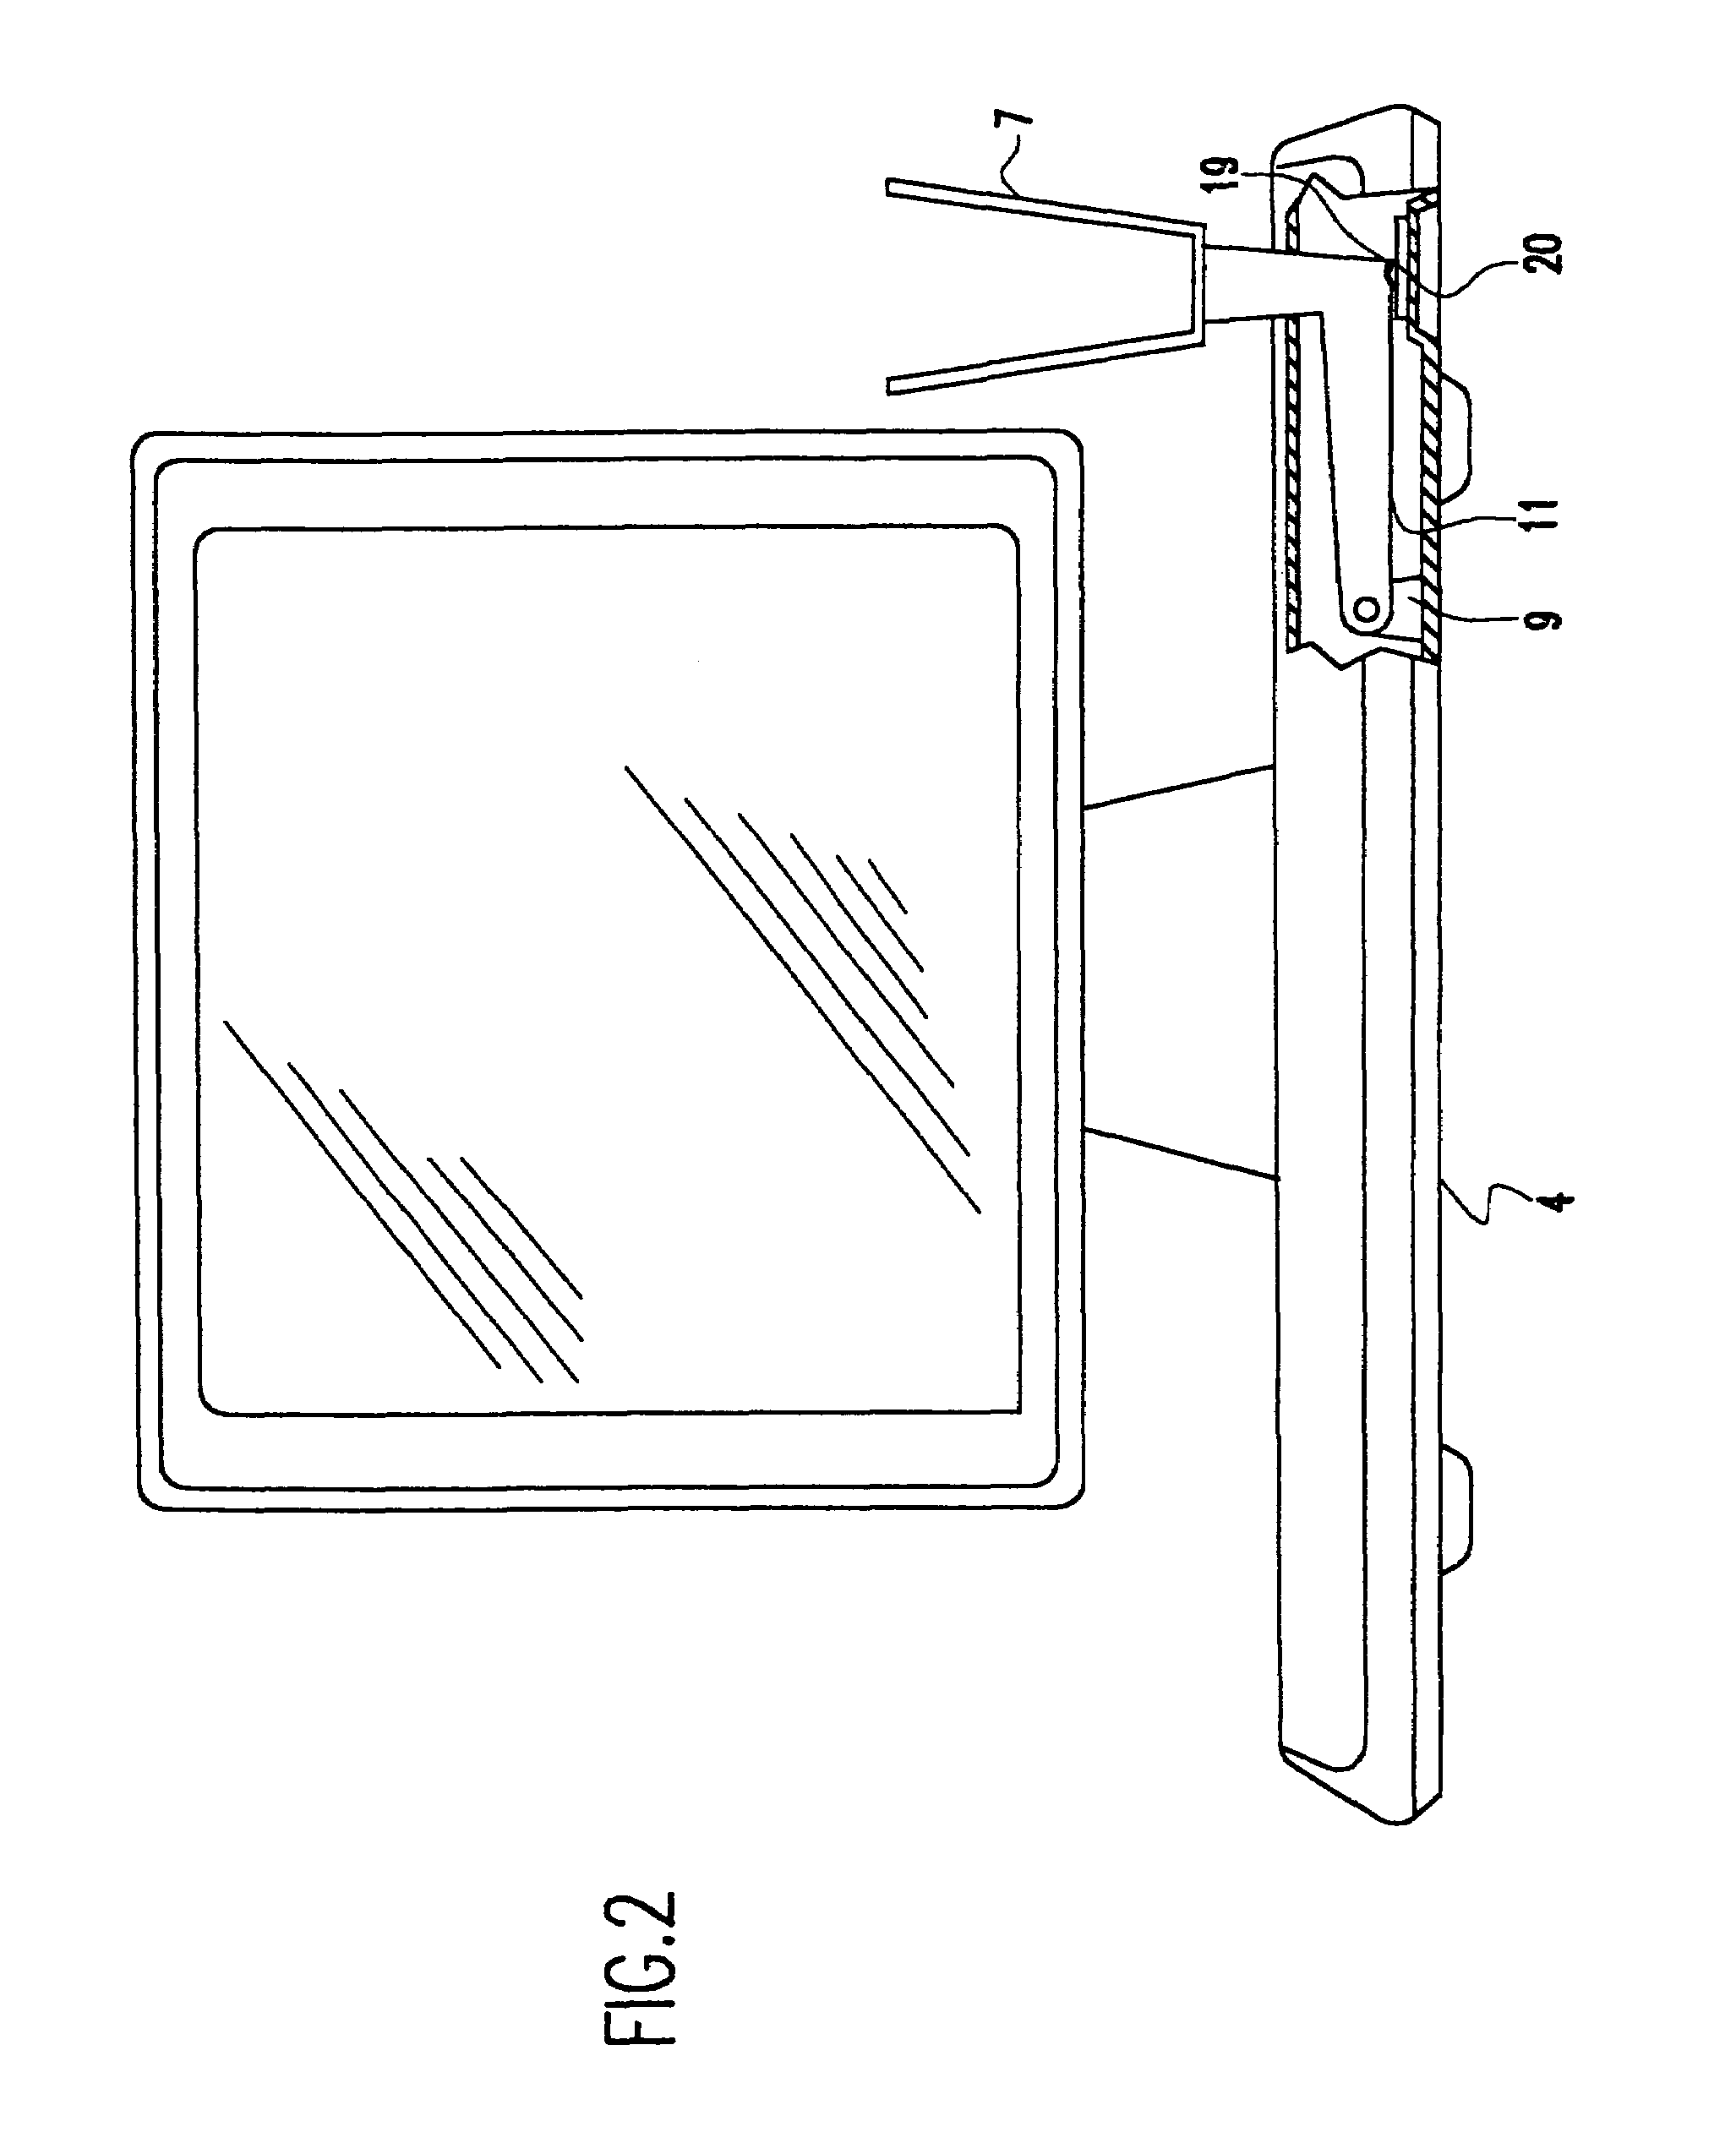 Integrated electronic scale, and a system and method which uses the scale automatically to compute postal/carrier rates